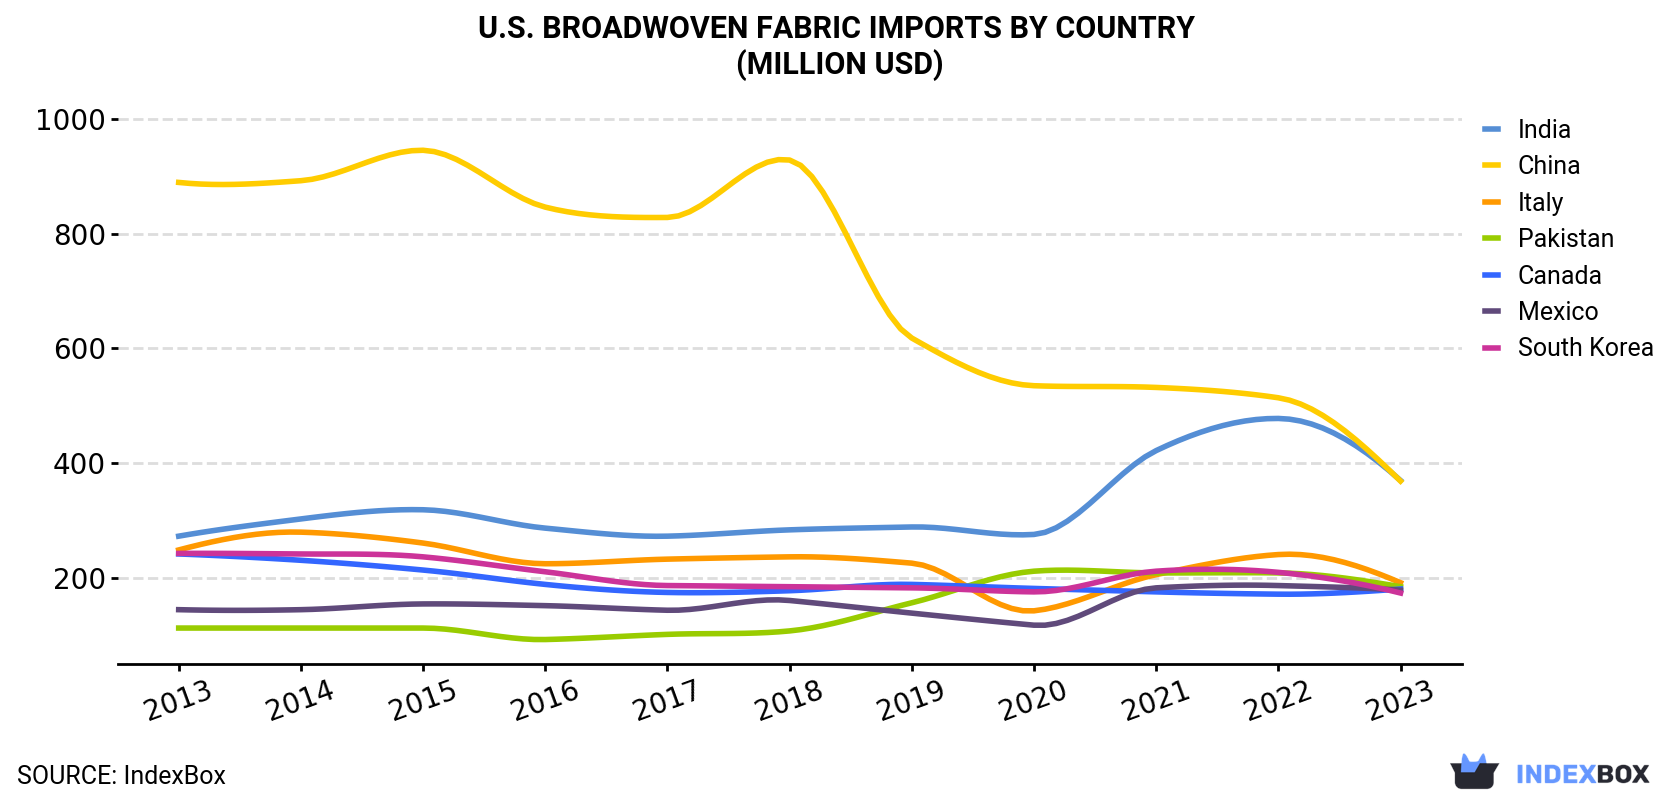 U.S. Broadwoven Fabric Imports By Country (Million USD)